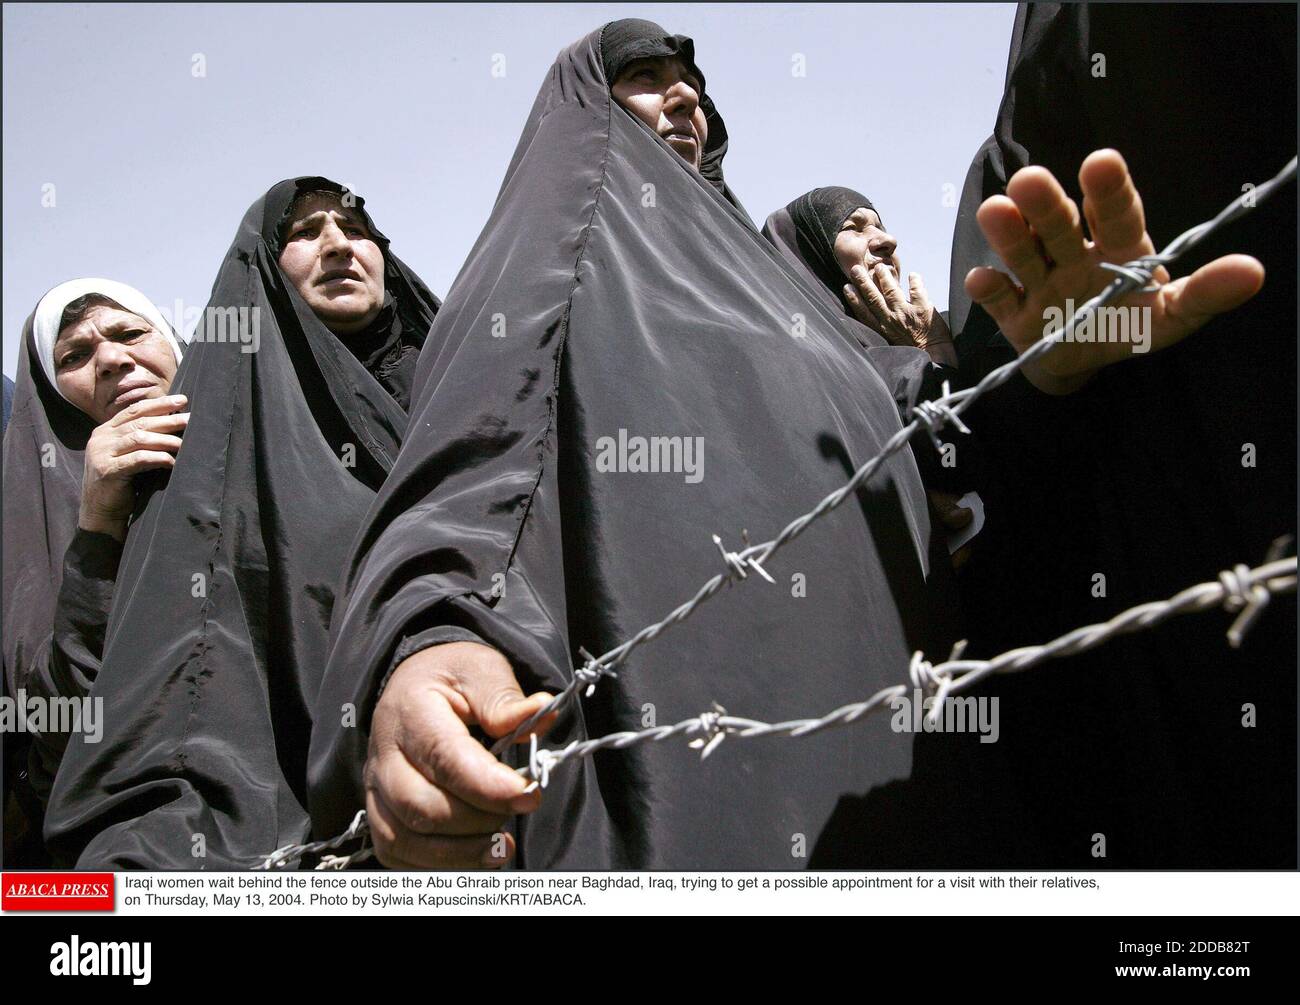 NO FILM, NO VIDEO, NO TV, NO DOCUMENTARY - Iraqi women wait behind the fence outside the Abu Ghraib prison near Baghdad, Iraq, trying to get a possible appointment for a visit with their relatives, on Thursday, May 13, 2004. Photo by Sylwia Kapuscinski/KRT/ABACA. Stock Photo